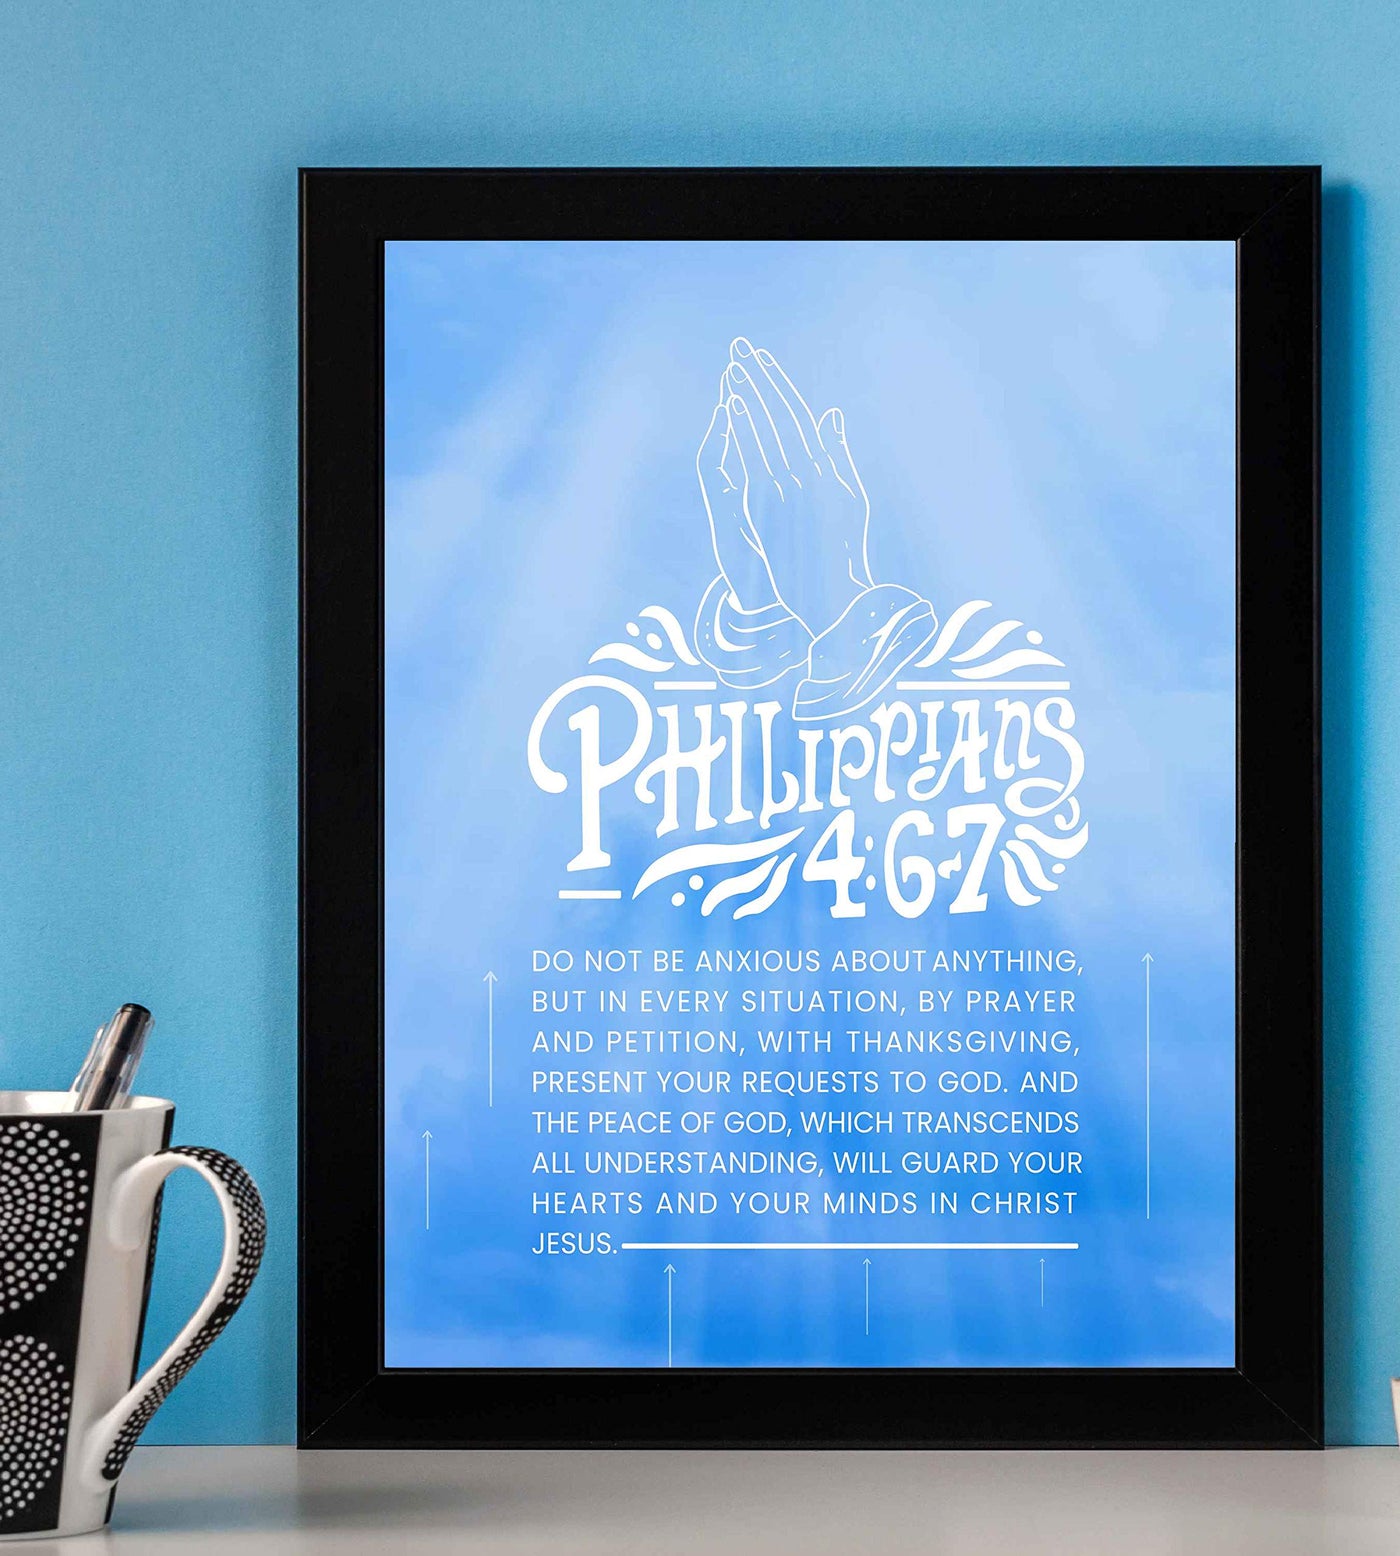 Philippians 4:6-7-"Do Not Be Anxious-Present Your Requests to God"-Bible Verse Wall Art-8 x 10" Scripture Poster Print-Ready To Frame. Christian Home-Office-Church D?cor. Great Reminder to Pray!